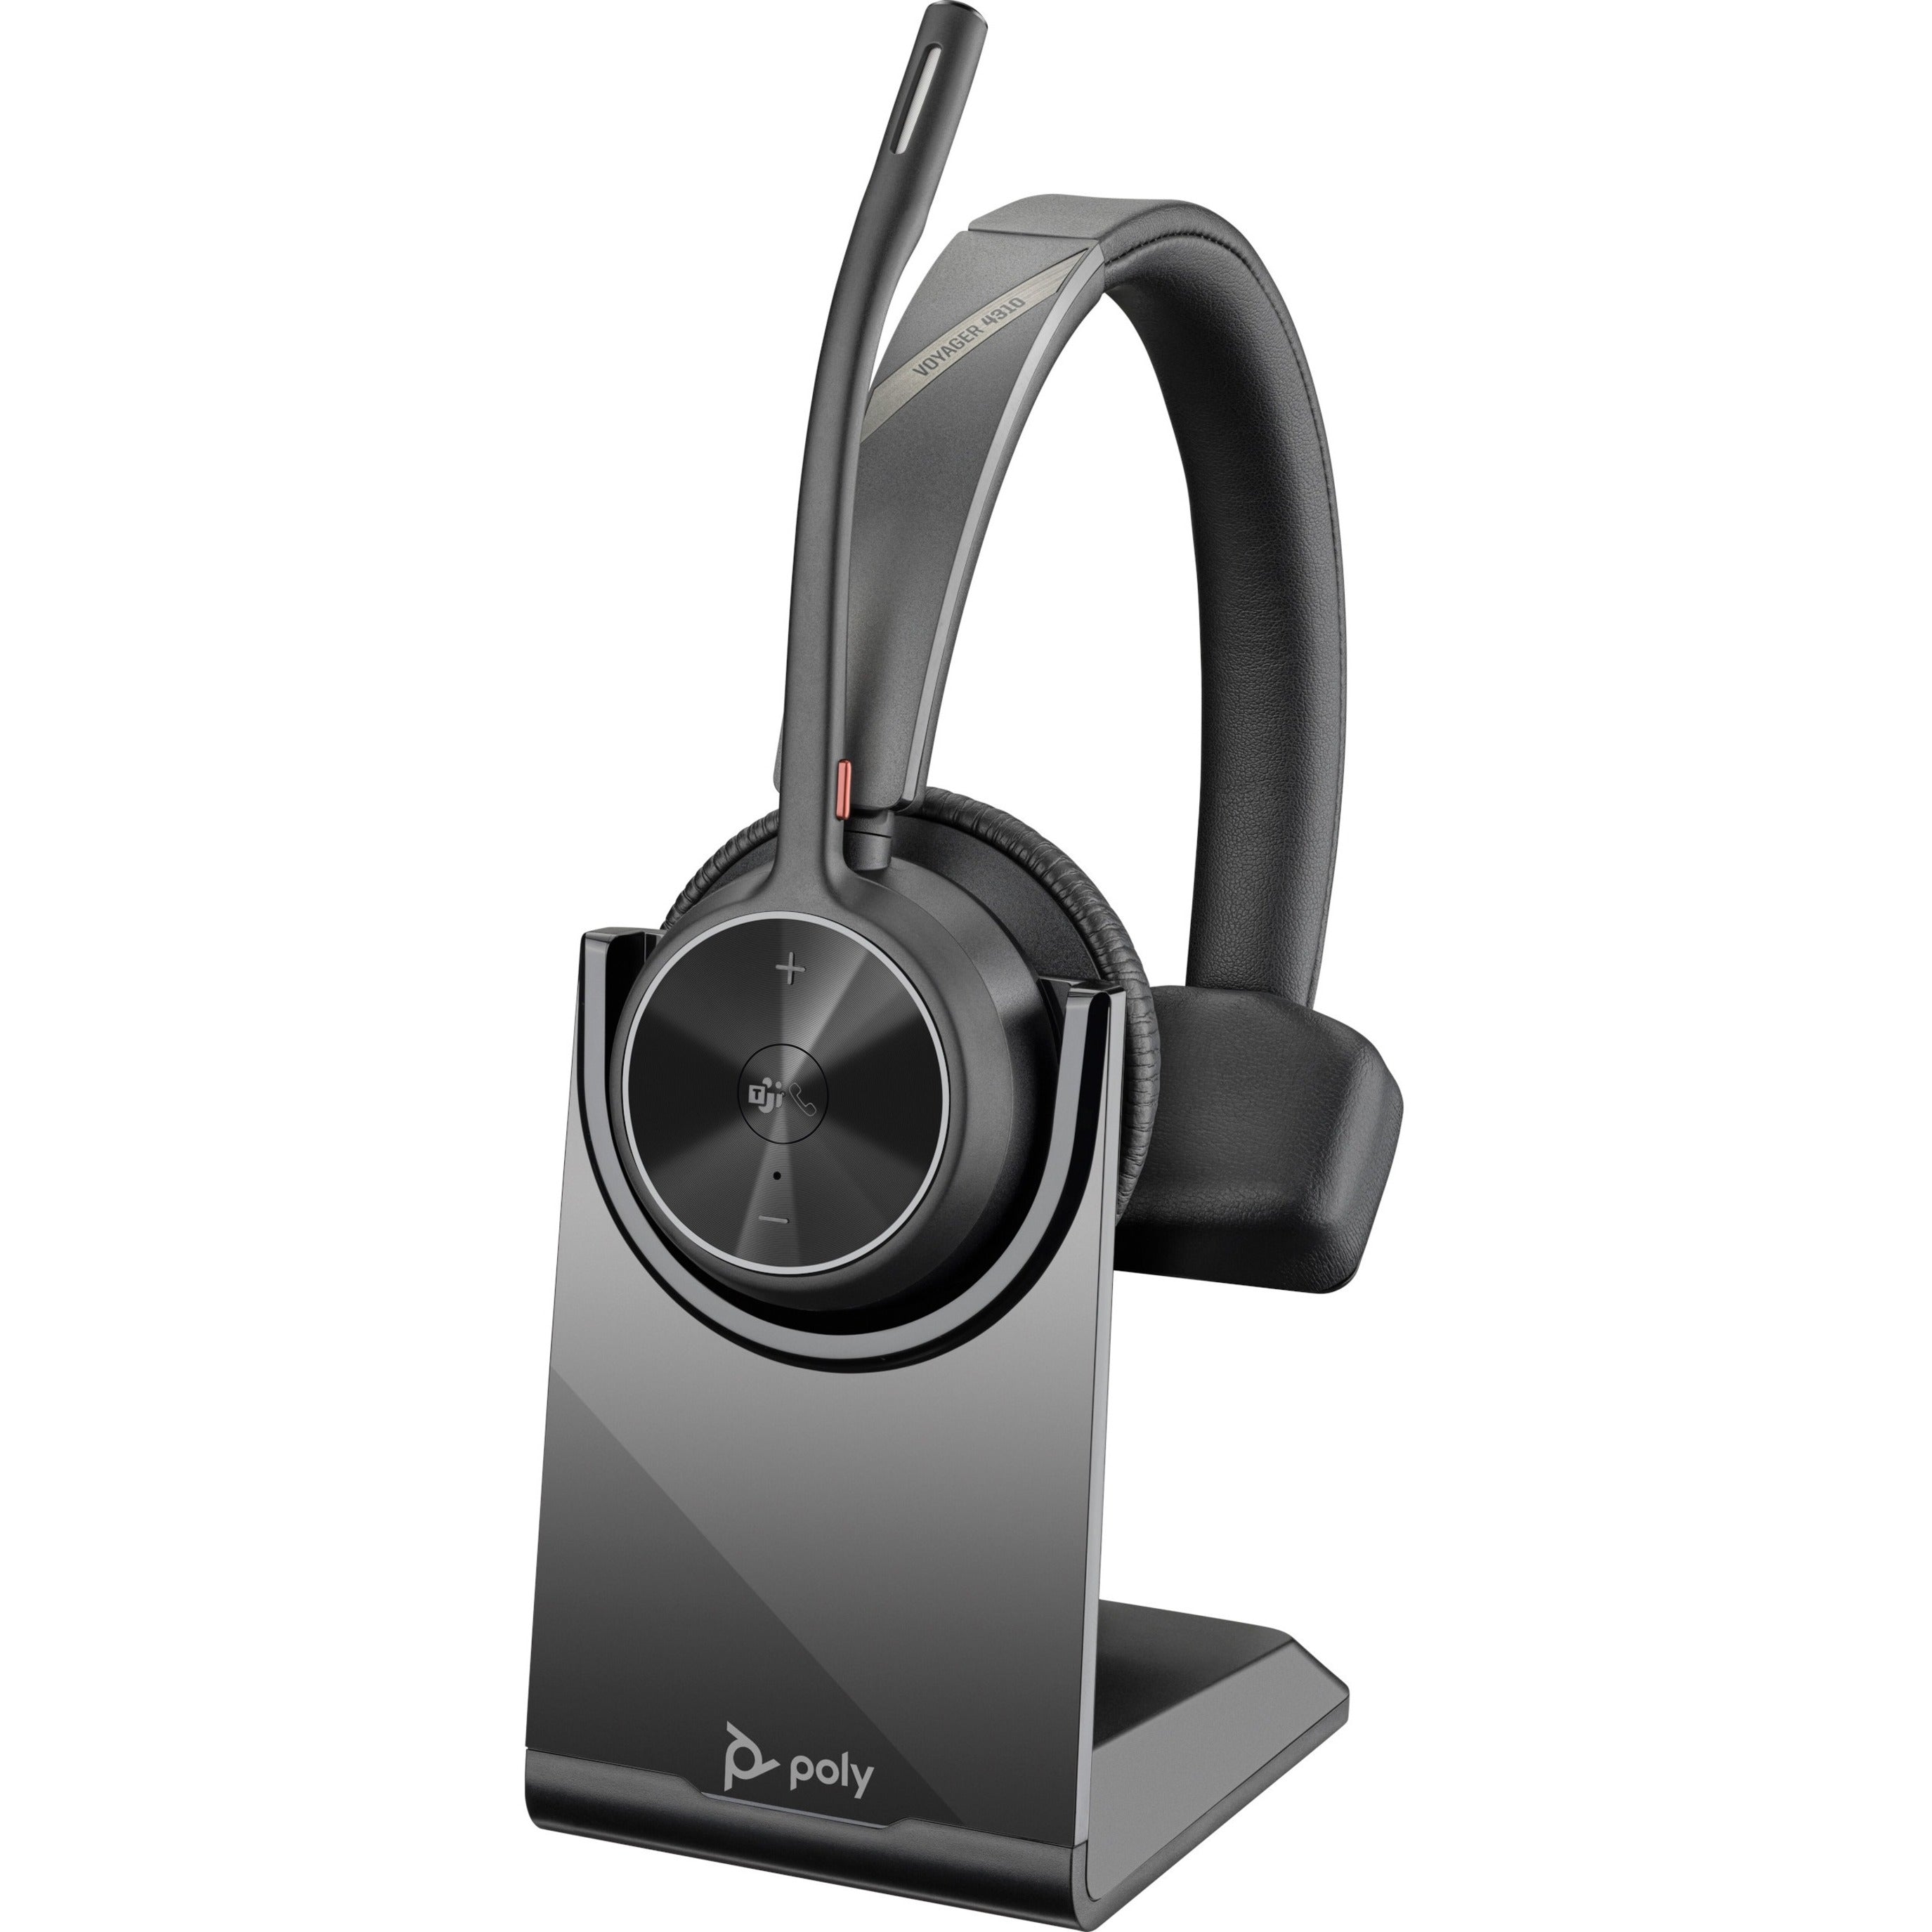 Poly 77Y93AA Voyager 4310-M Microsoft Teams Certified Headset With Charge Stand, Over-the-head Binaural Headset for Smartphone, Music, Office, PC, Mac